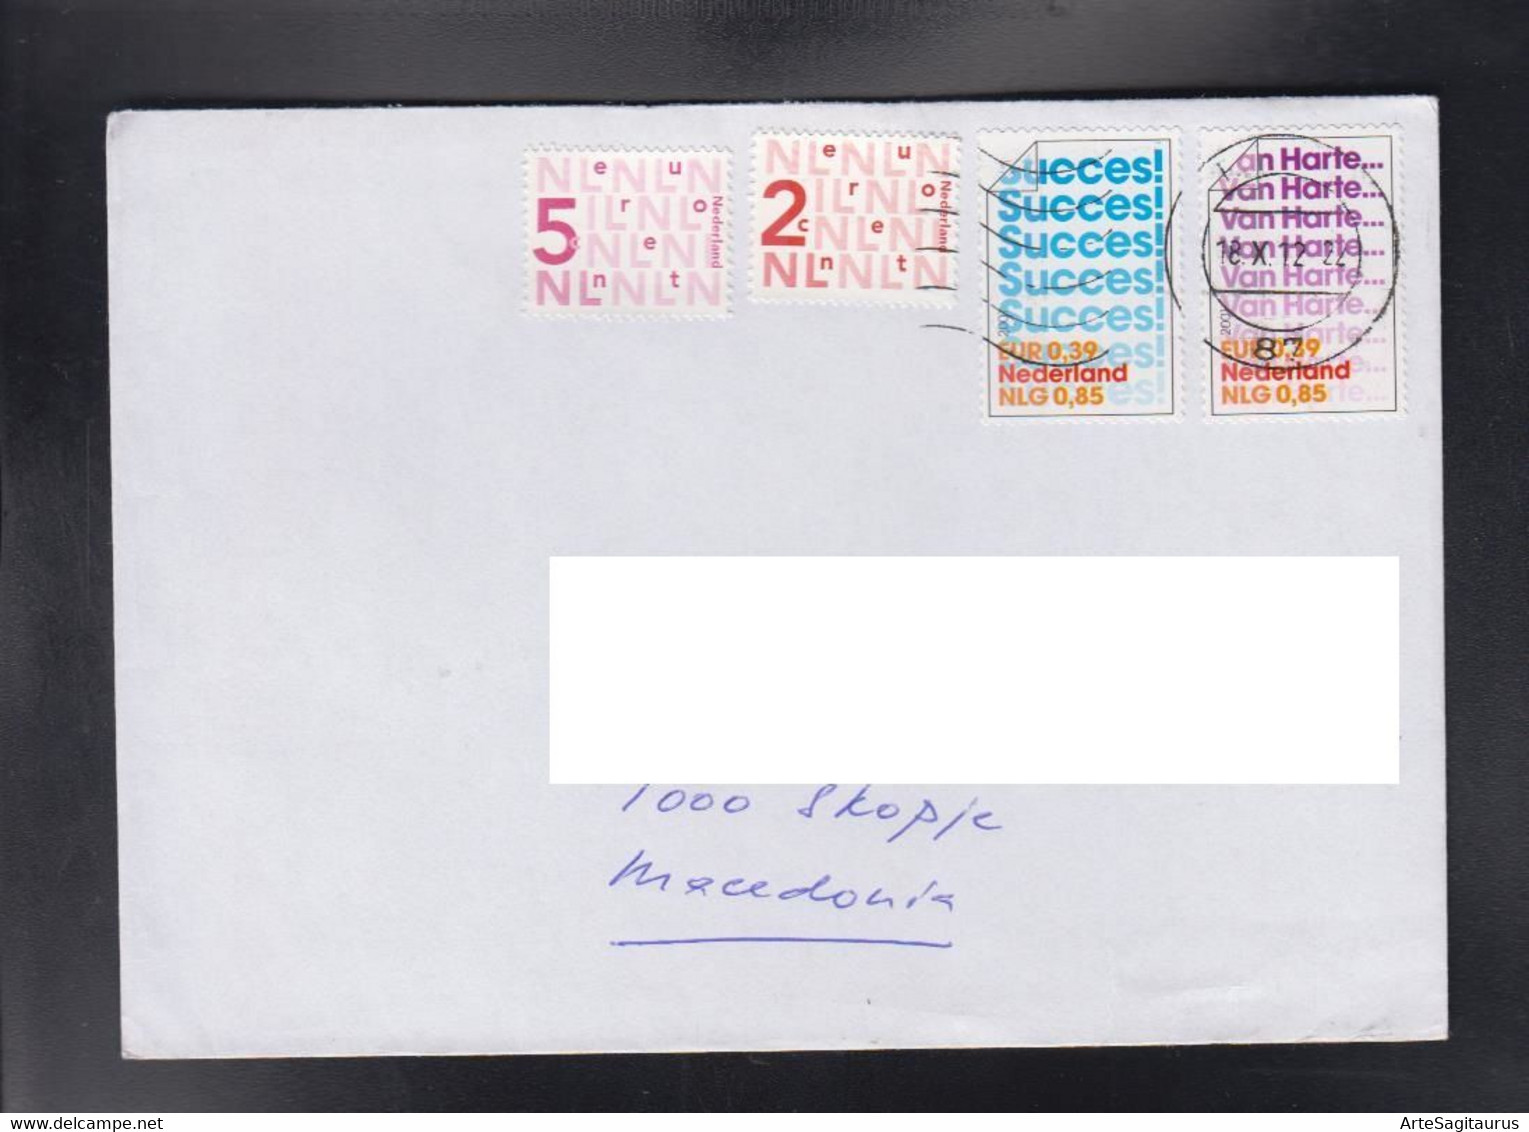 NETHERLANDS, COVER, REPUBLIC OF MACEDONIA + - Covers & Documents